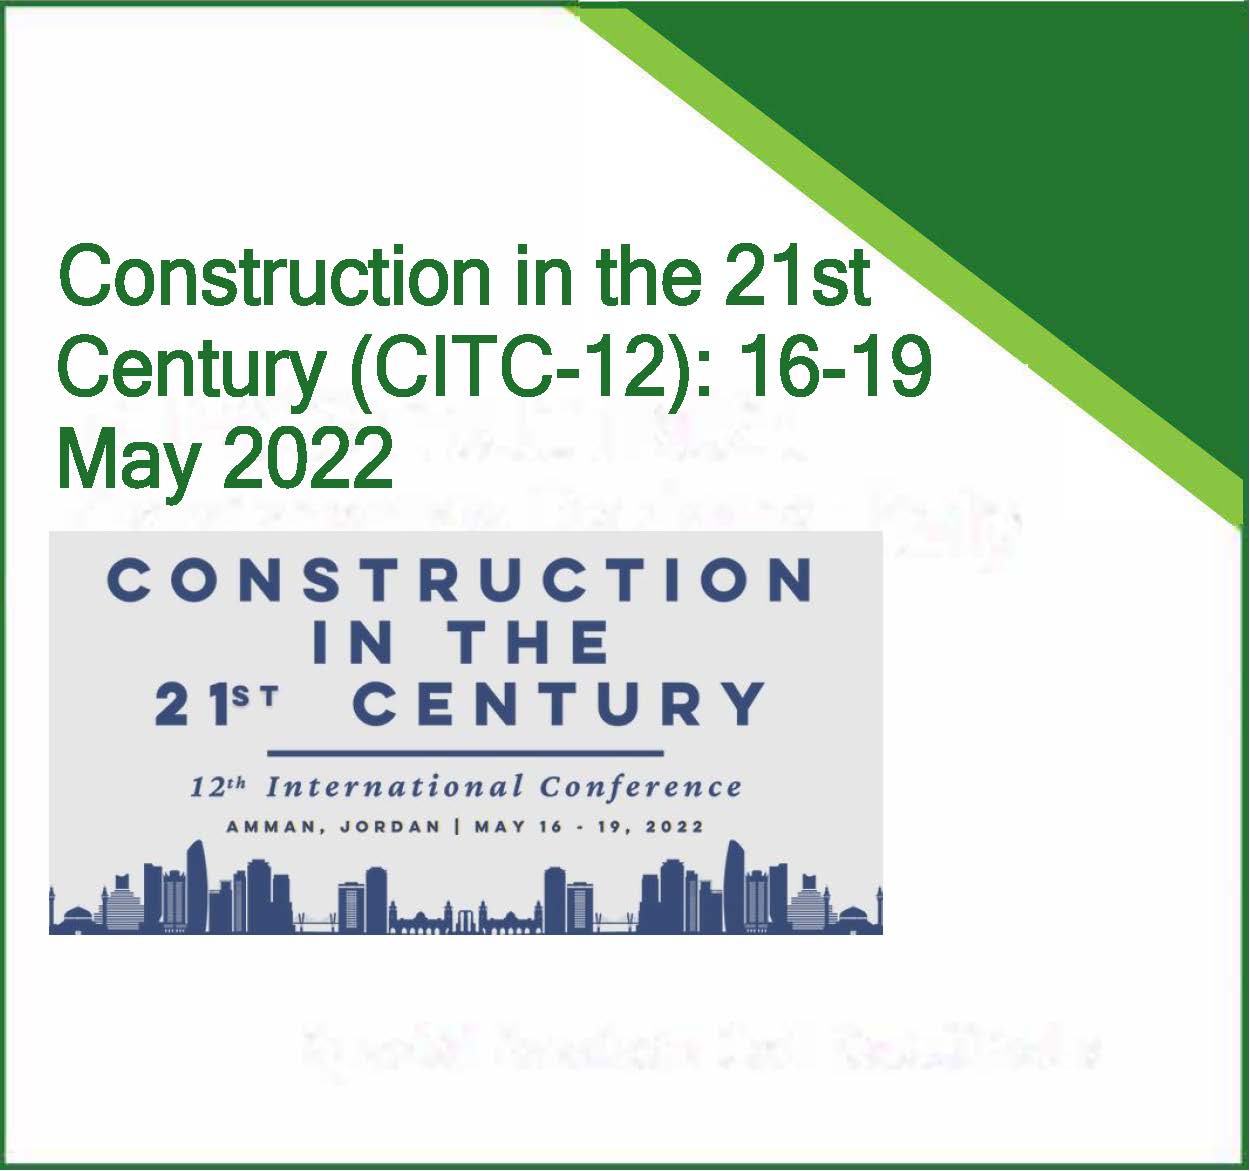 The 12th International Conference on Construction in the 21st Century